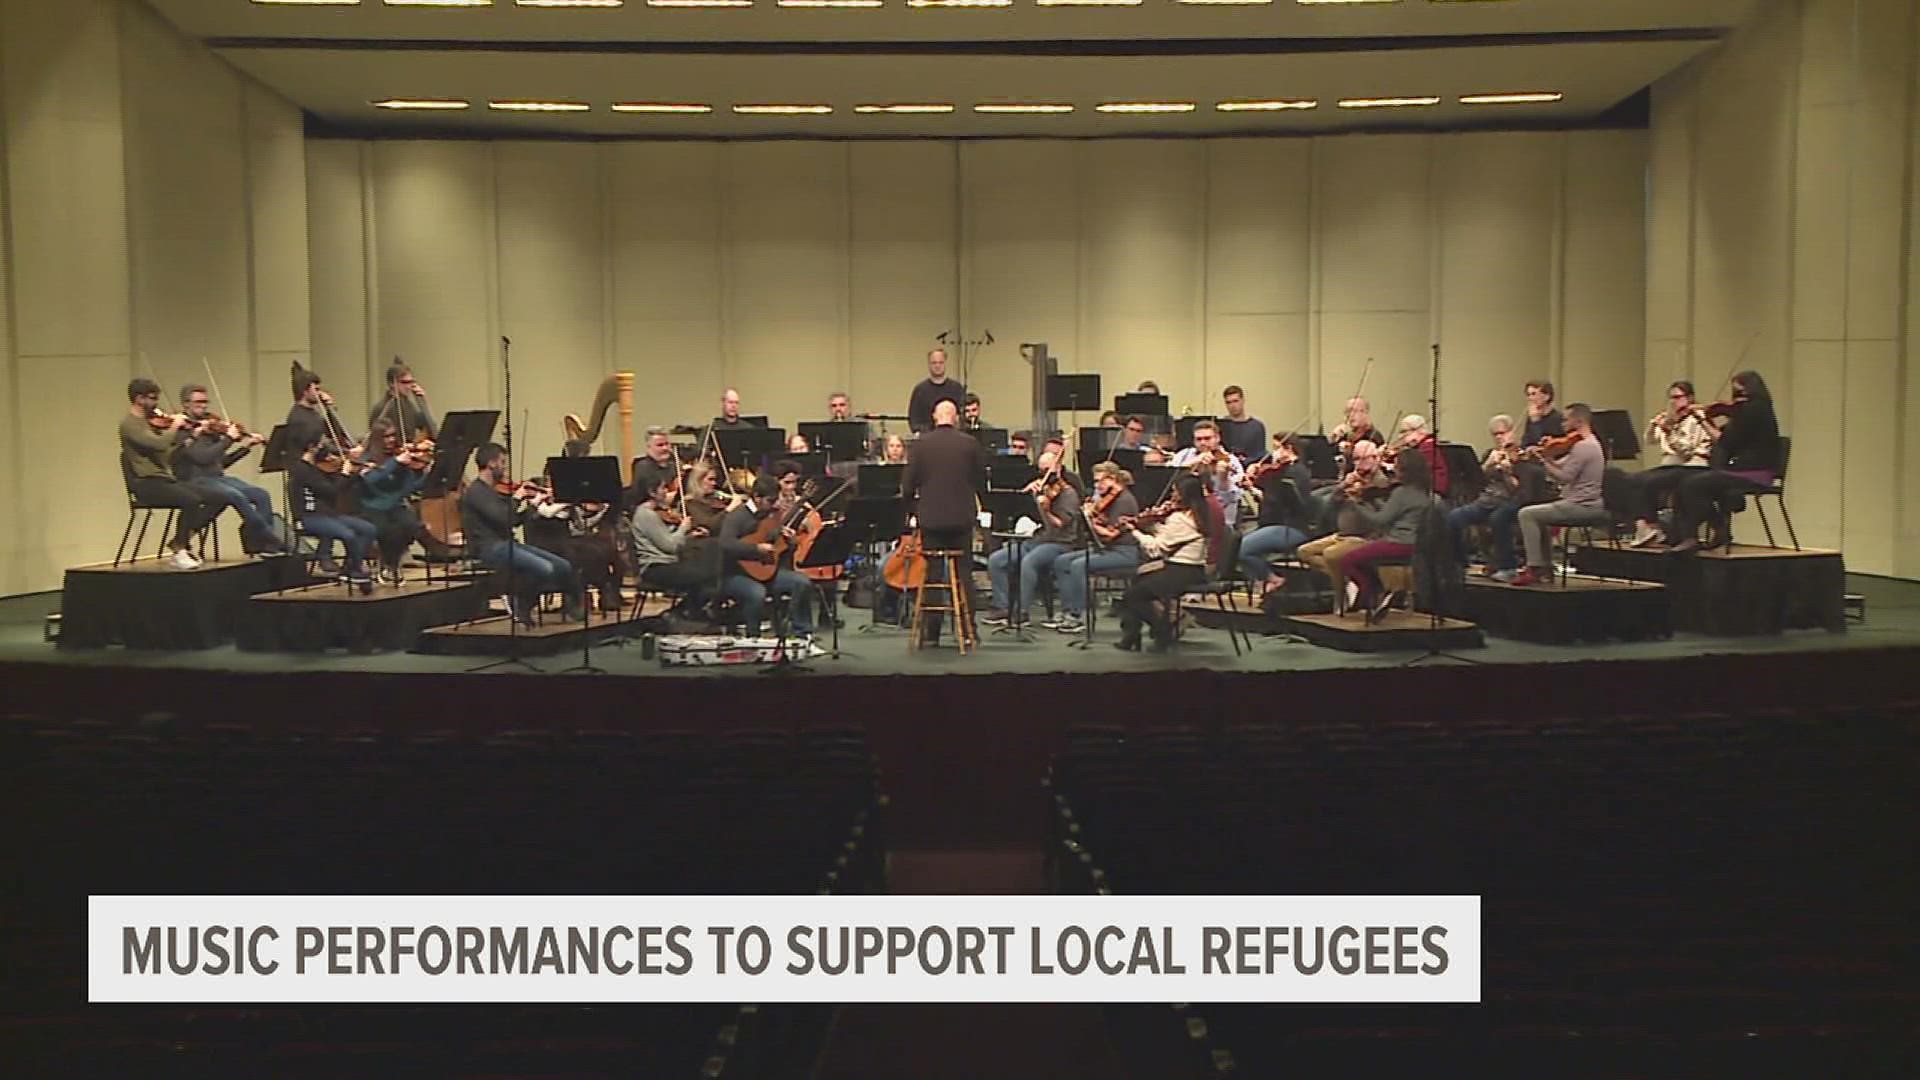 The Quad City Symphony Orchestra and World Relief Quad Cities are hosting two performances this weekend at the Adler Theater in Davenport.